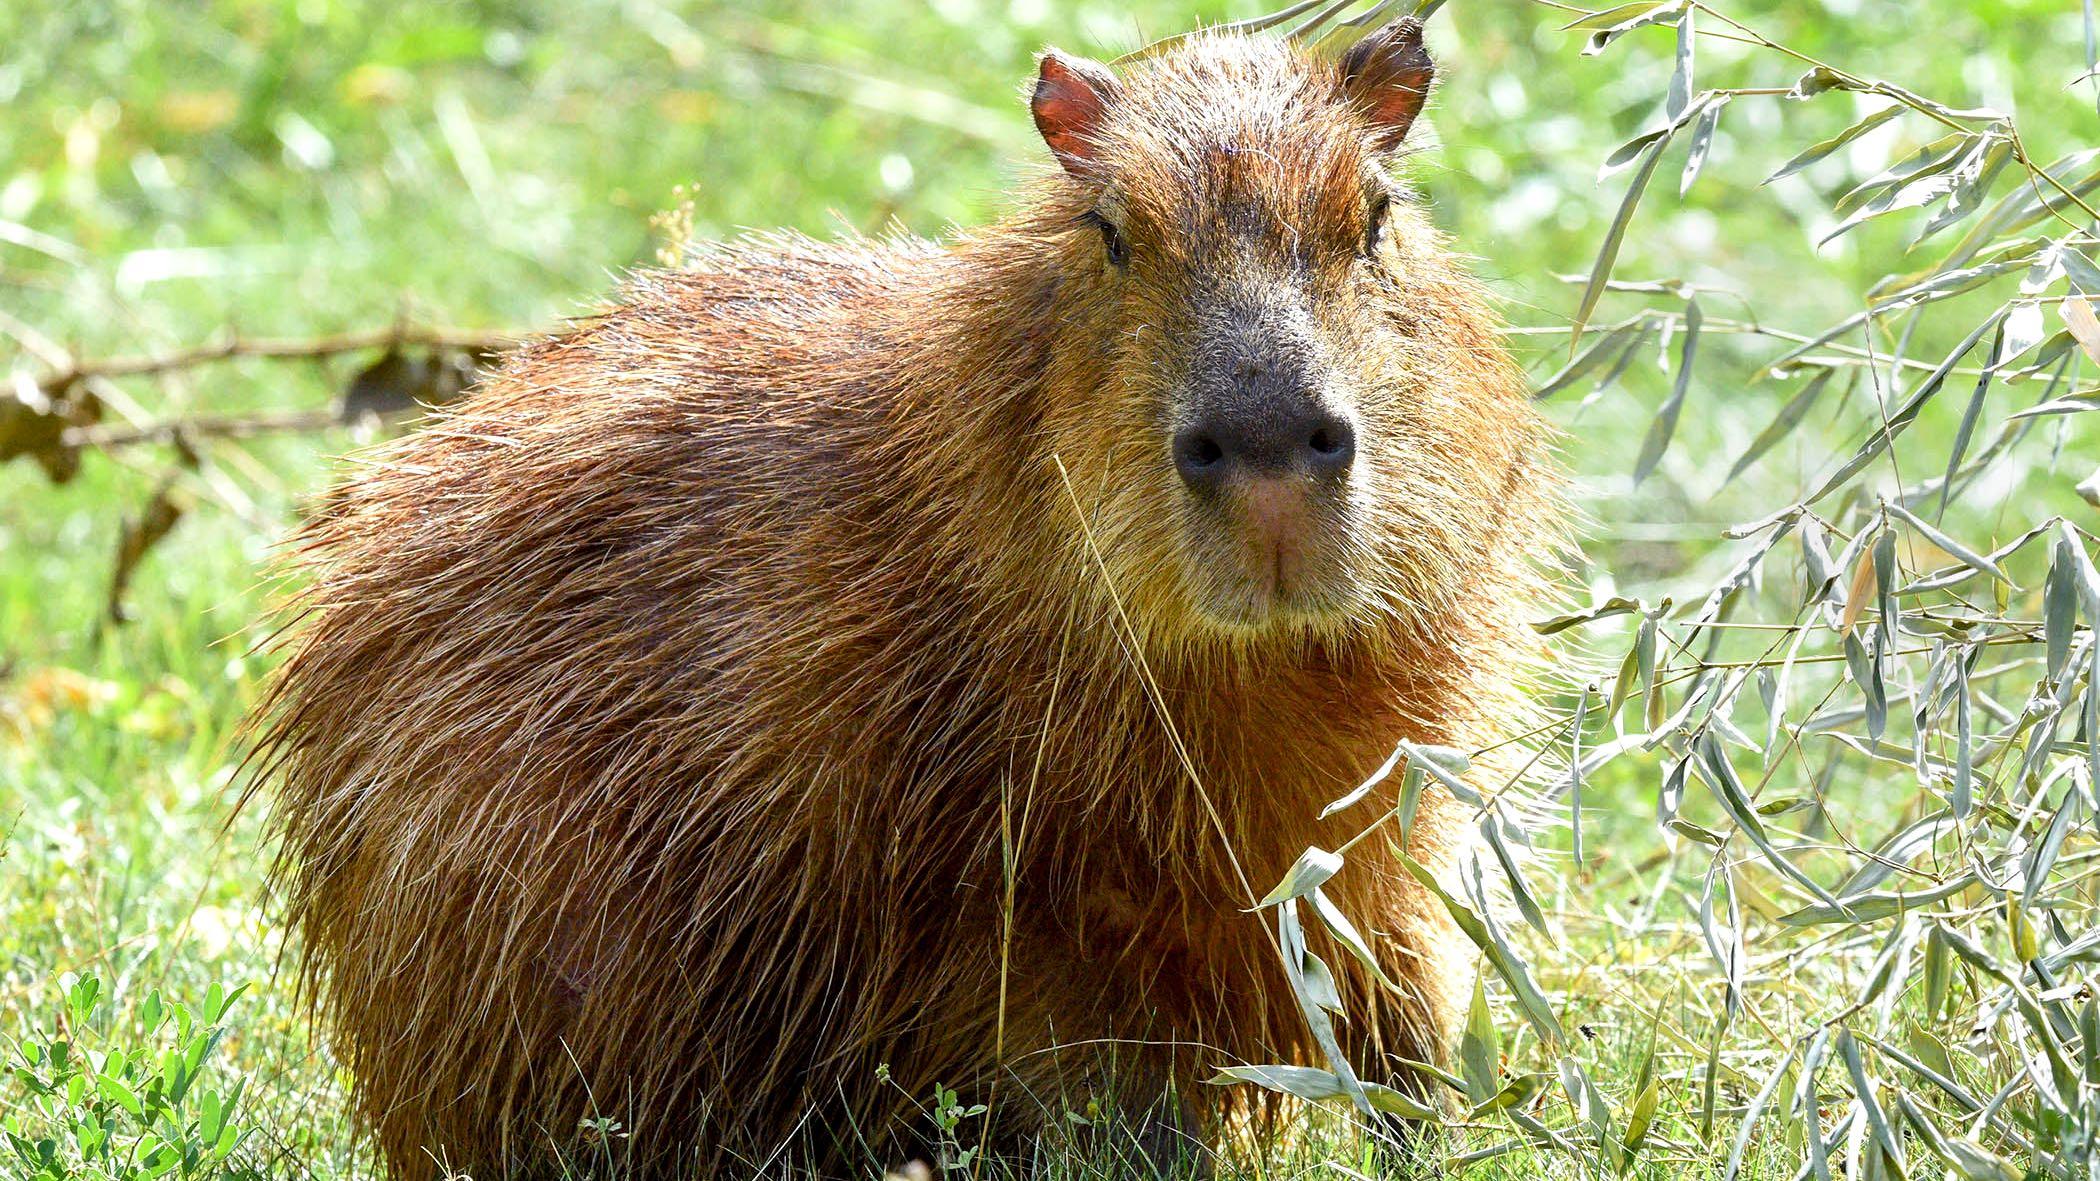 Capybara are in residence at the Brookfield Zoo for the first time in more than 40 years. (Jim Schulz / CZS-Brookfield Zoo)